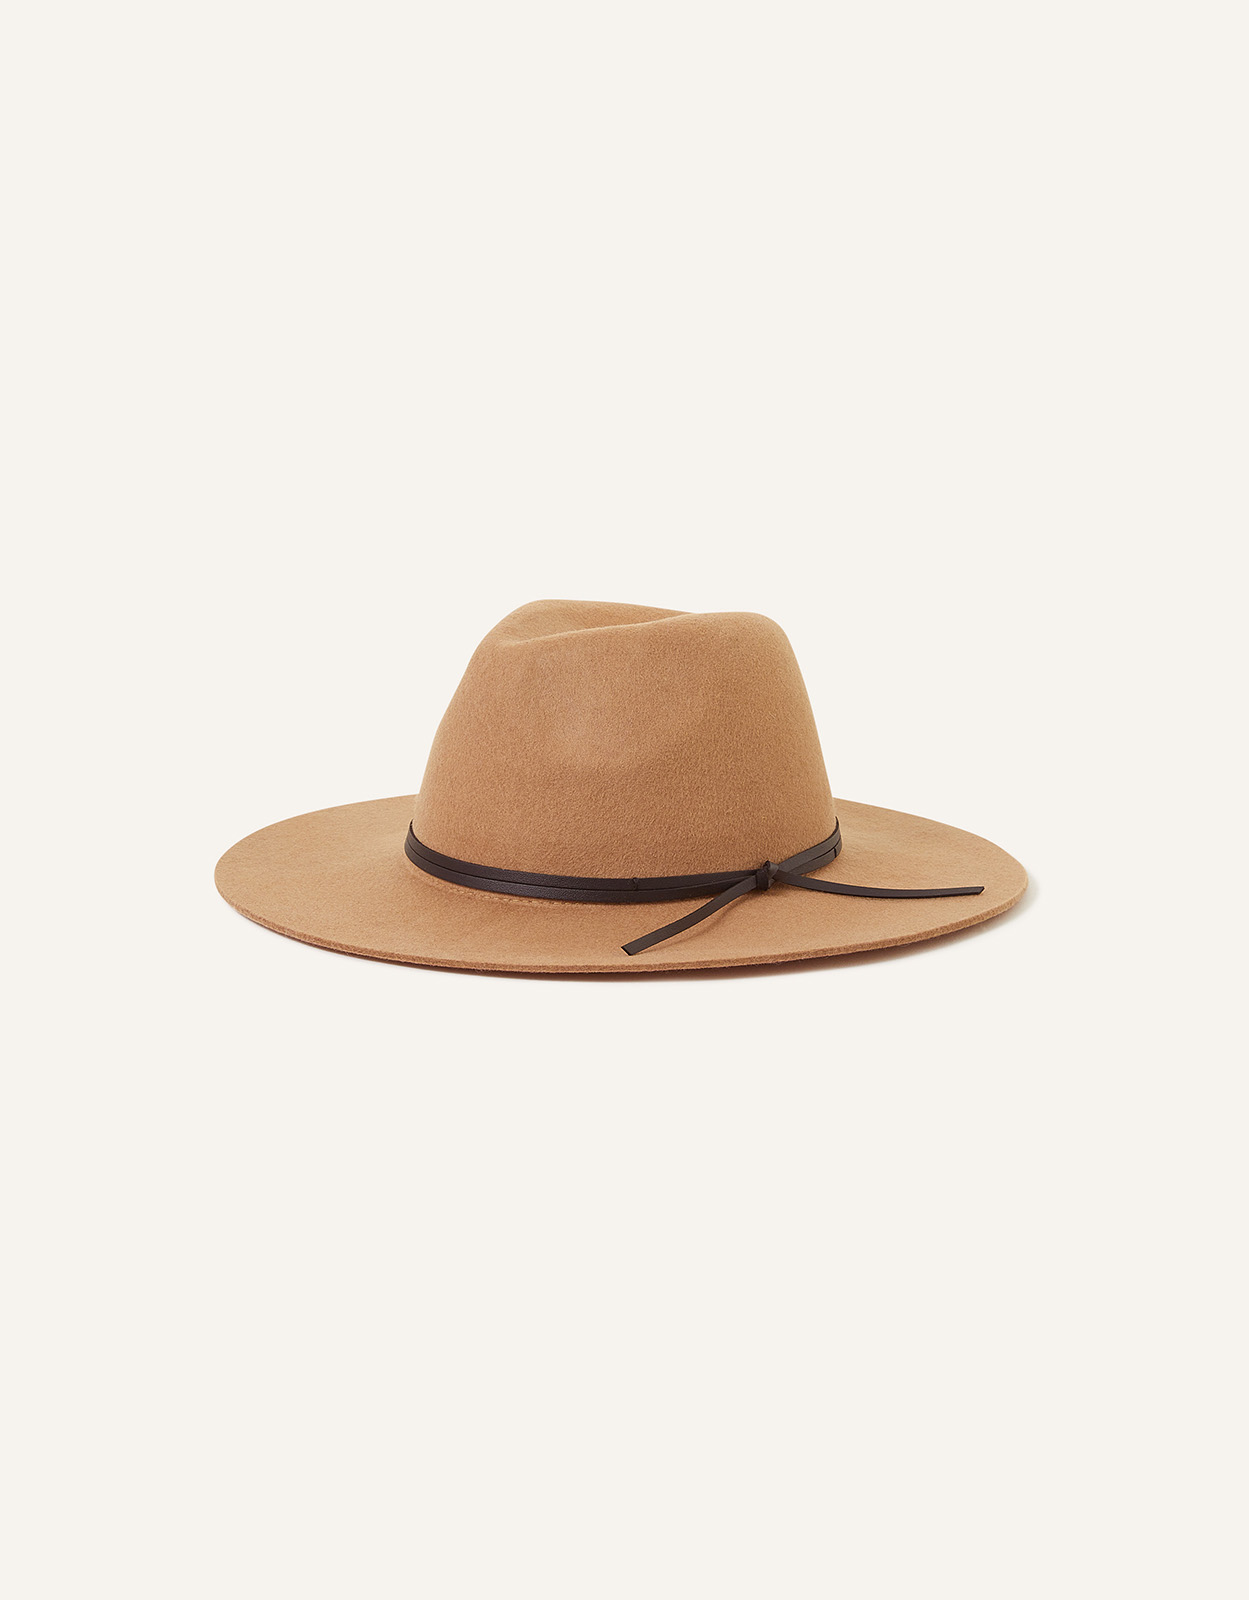 Accessorize Women's Brown Contemporary Wool Fedora Camel, Size: 57cm